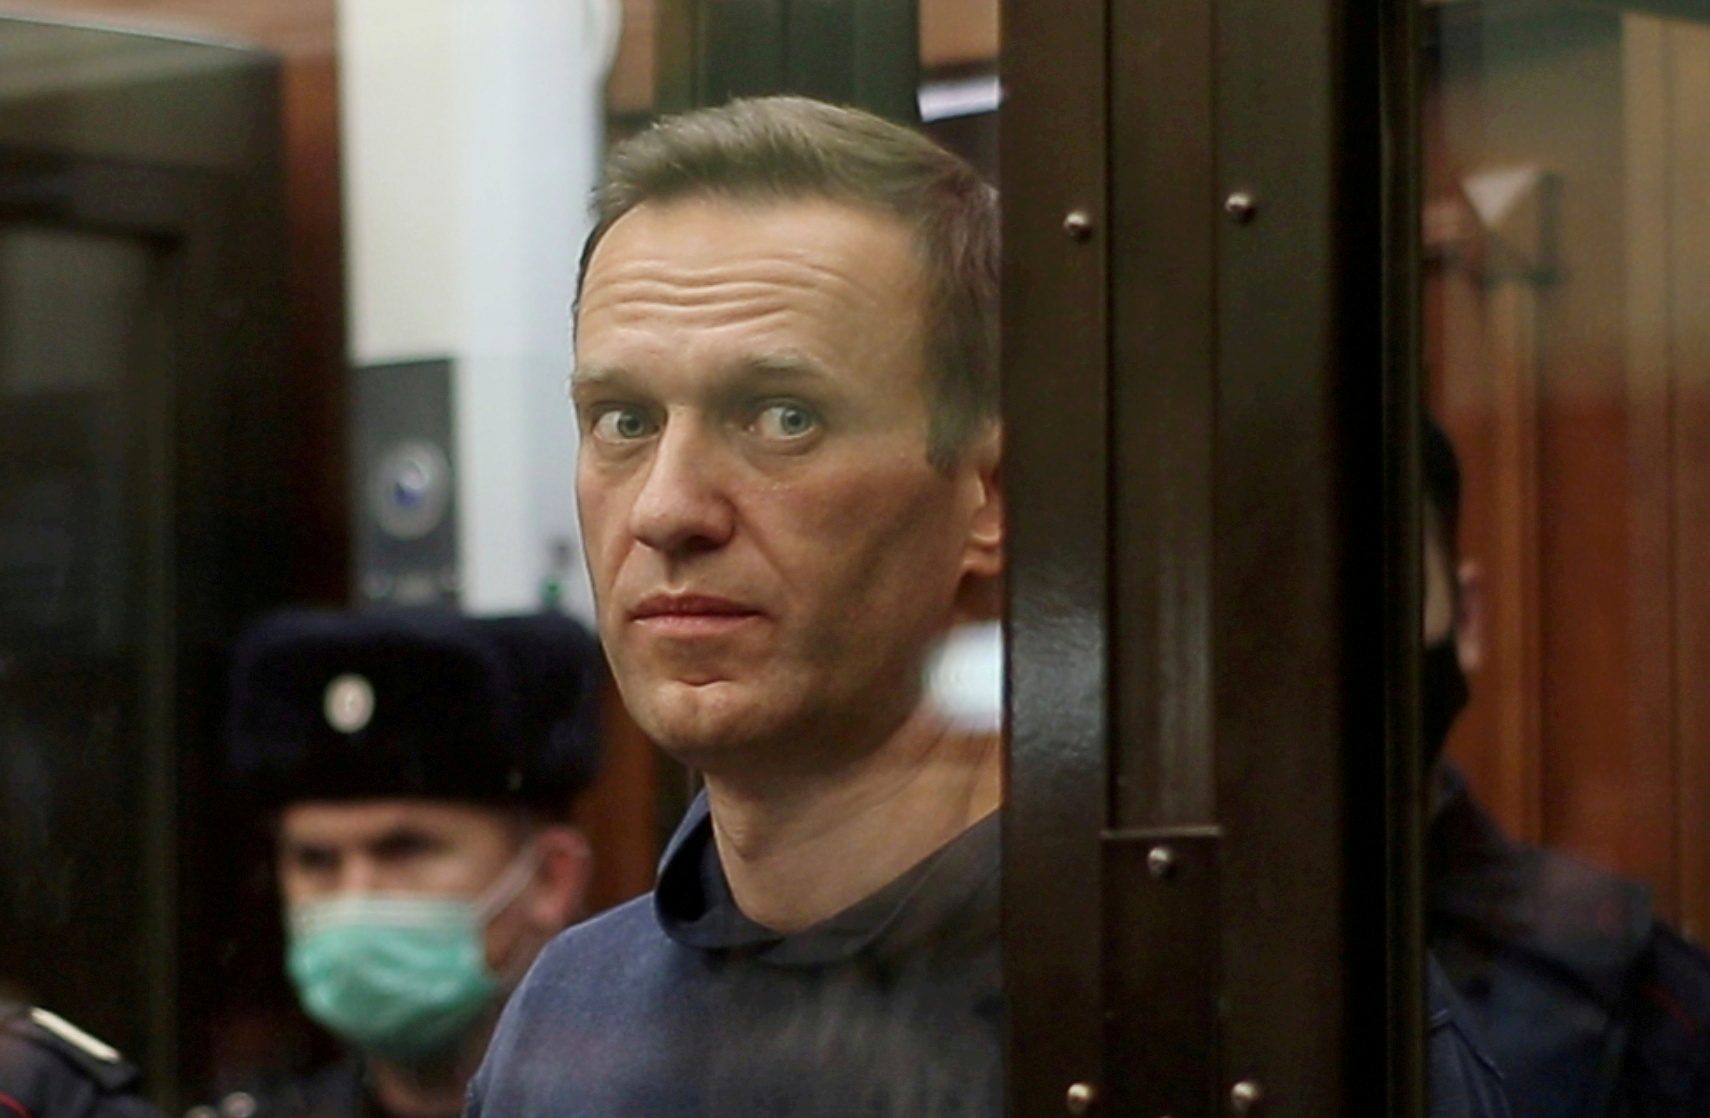 Russian prison threatens to force feed hunger-striking Kremlin critic Navalny – allies